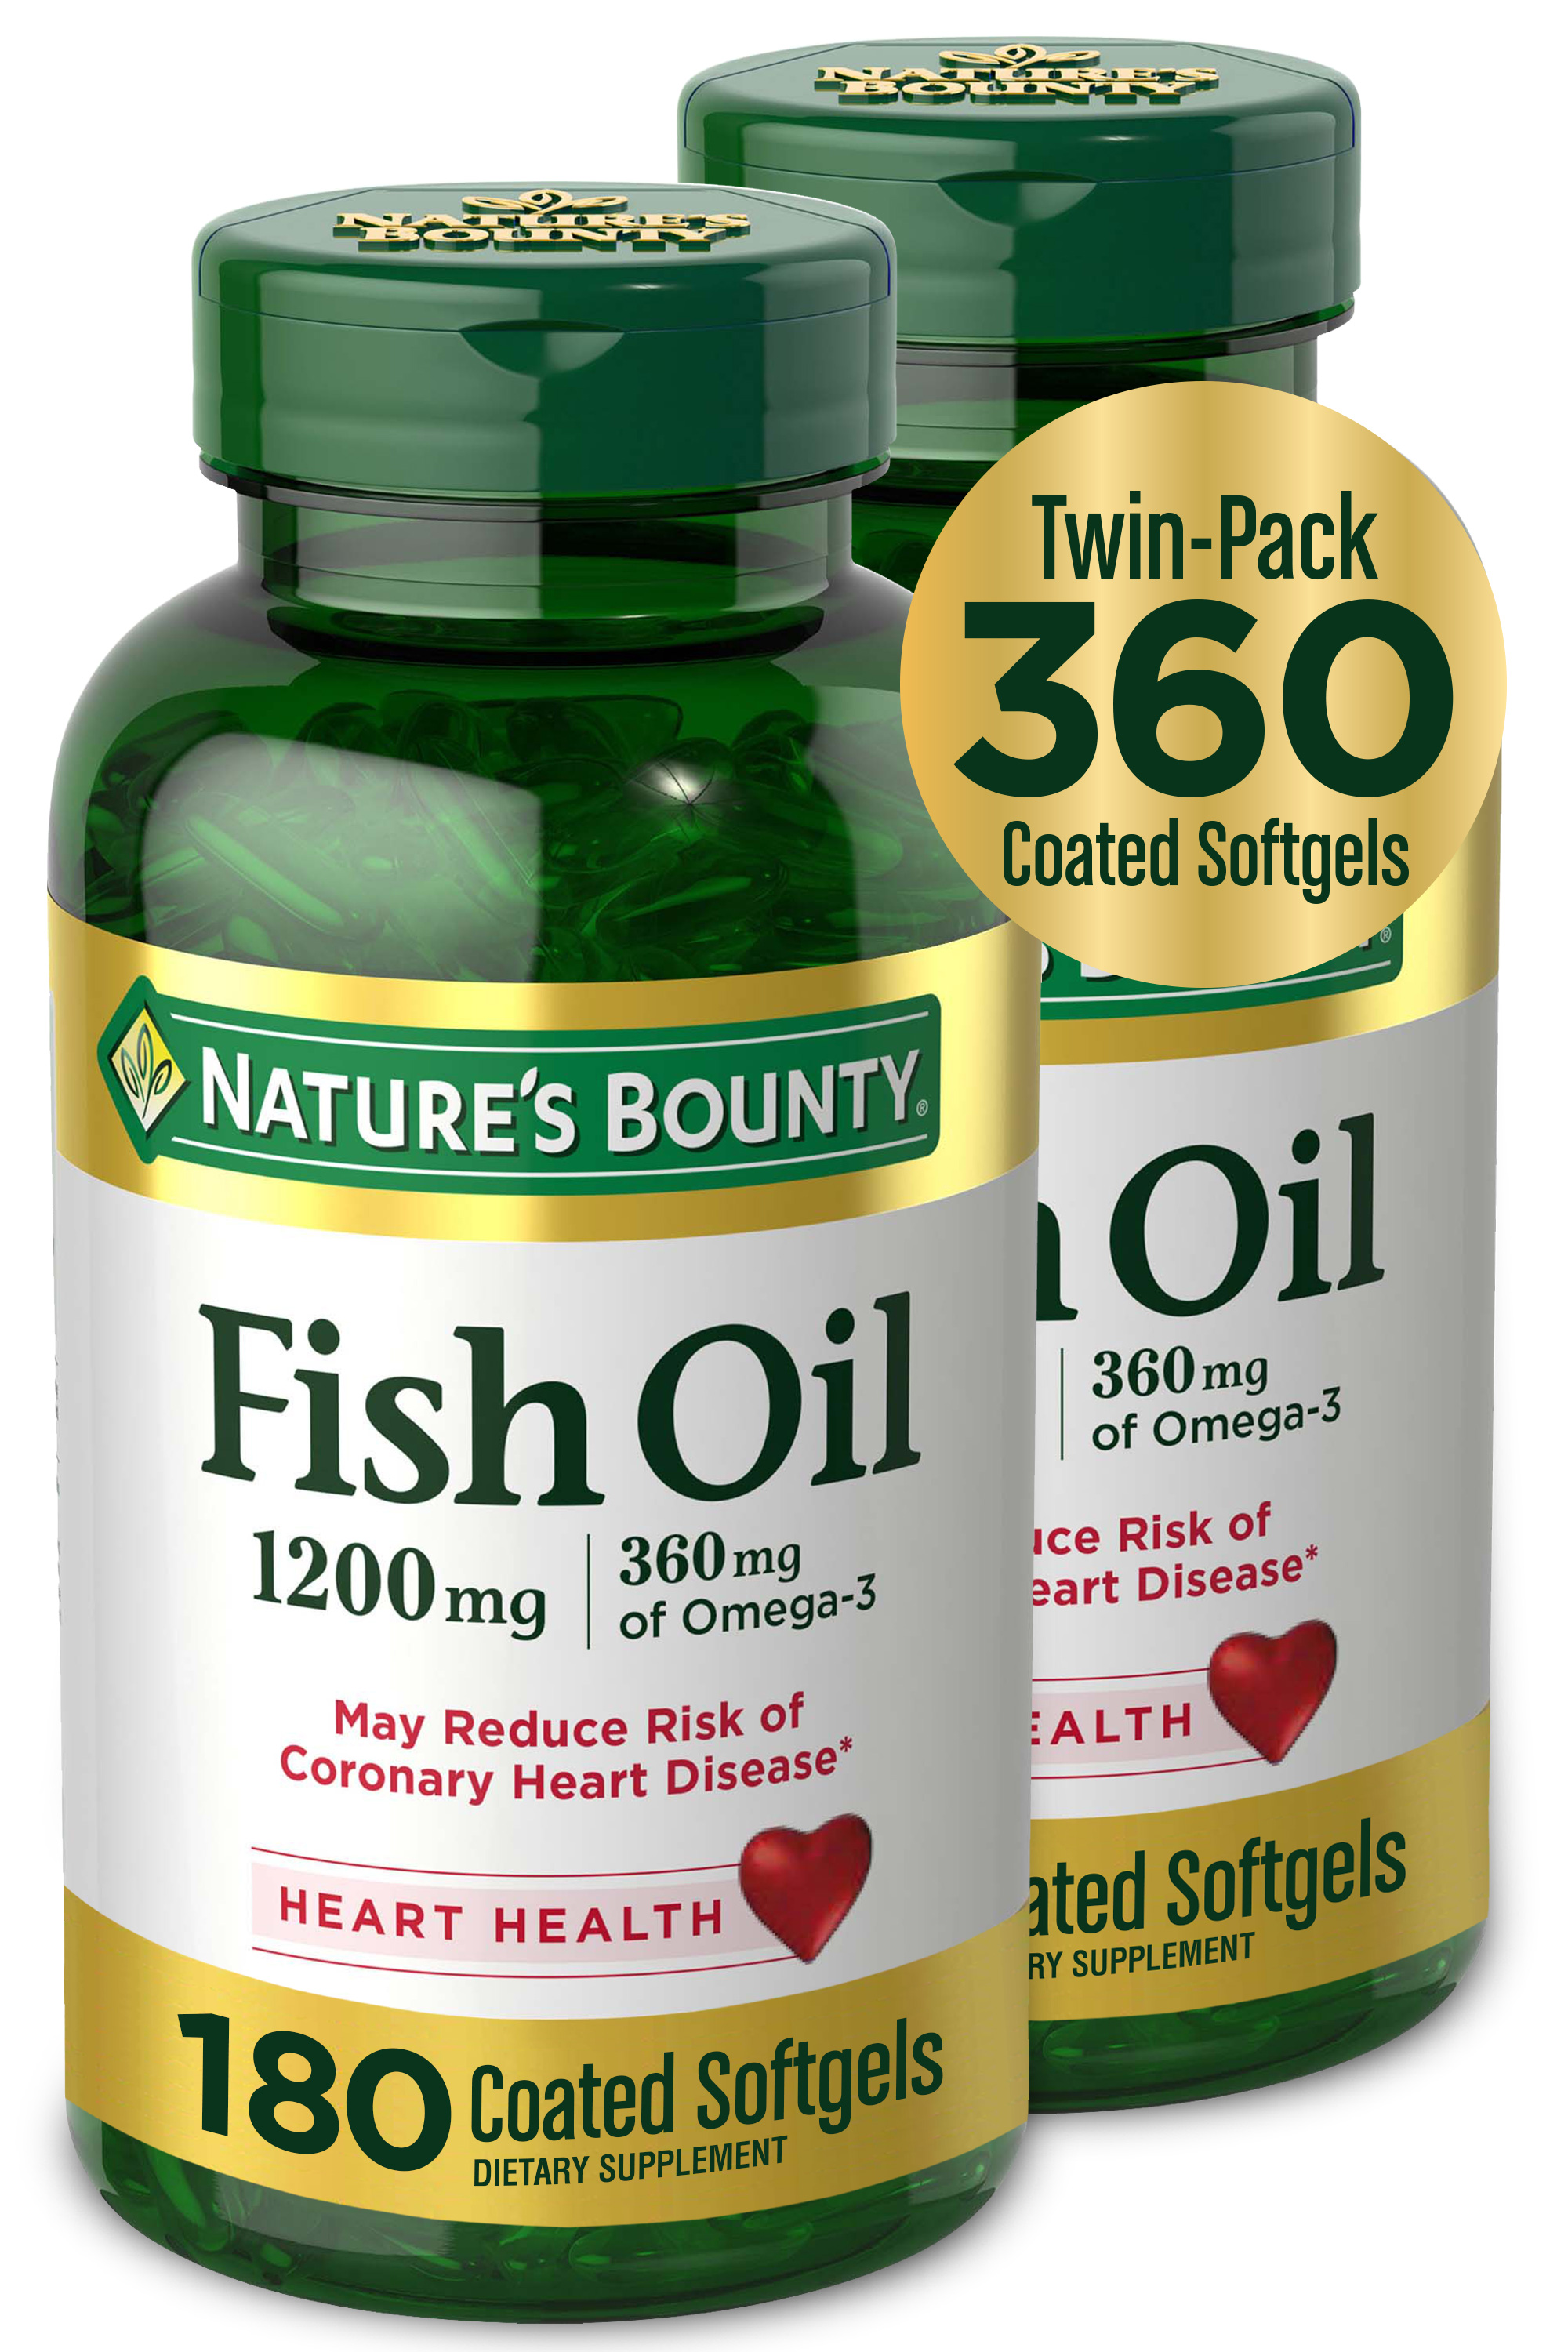 Nature's Bounty Fish Oil Softgels, 1200Mg, 180 Ct, 2 Pack - image 1 of 7